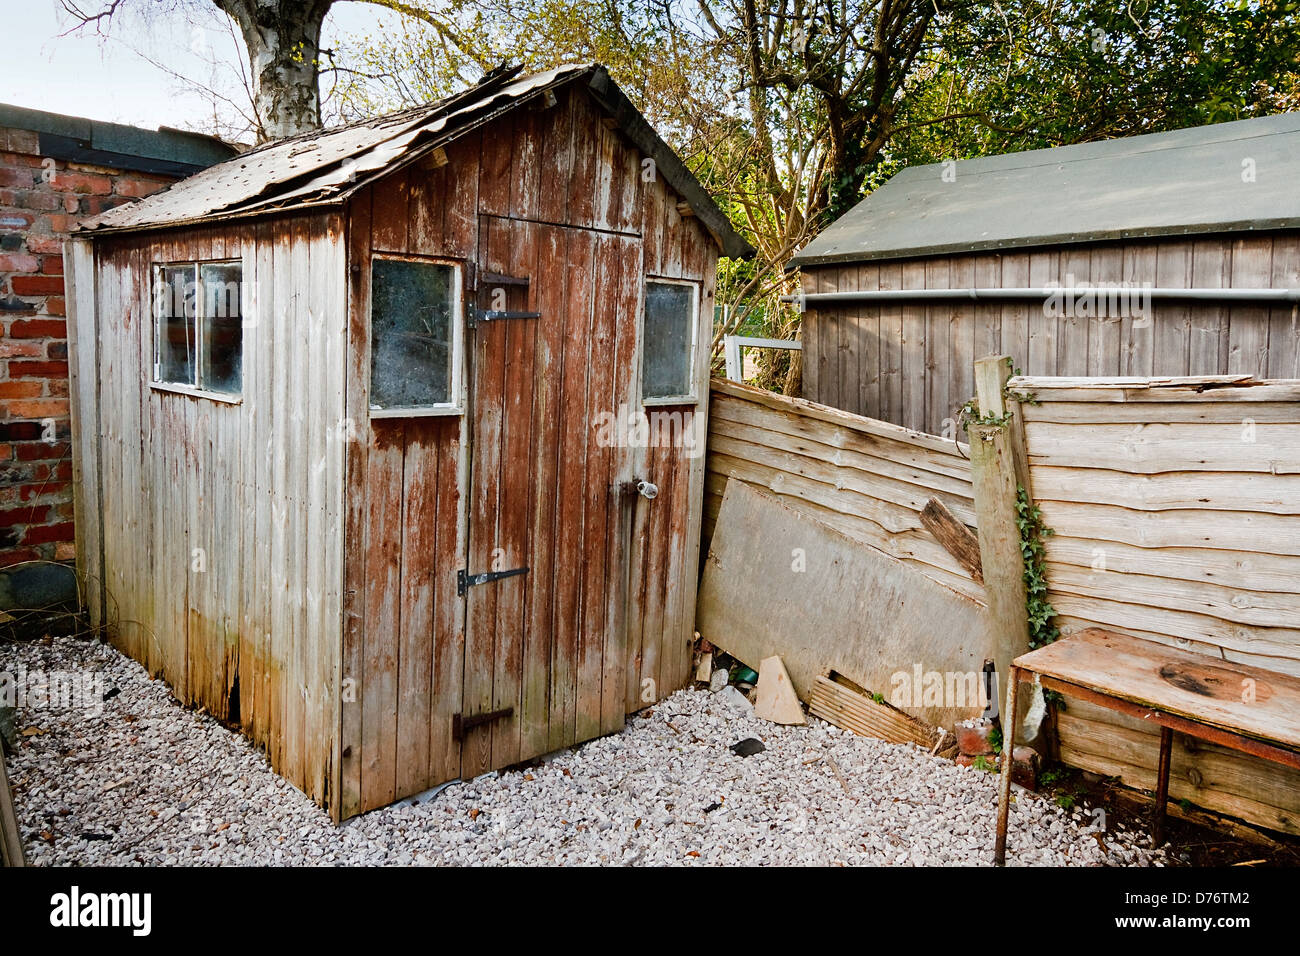 badly maintained old aged run down burlap panel wooden garden shed with damaged roof and hole from wood rot Stock Photo